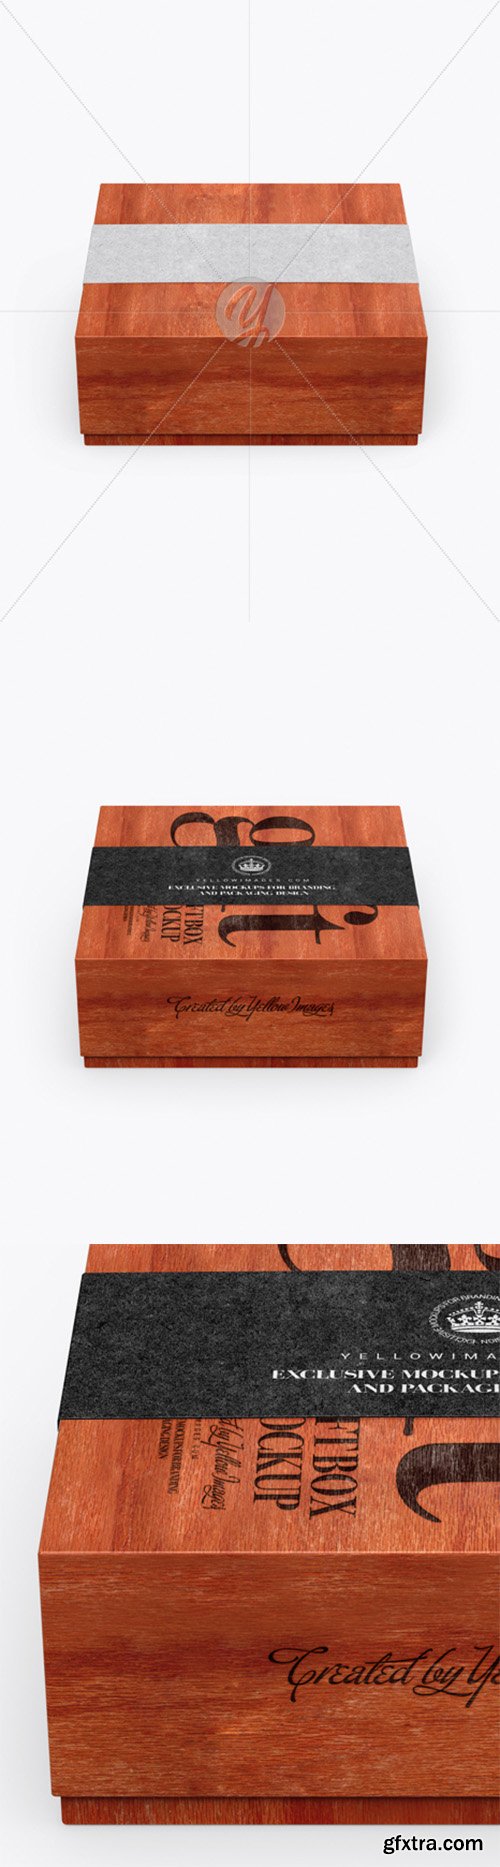 Red Wooden Box with Label Mockup (High-Angle Shot) 24542